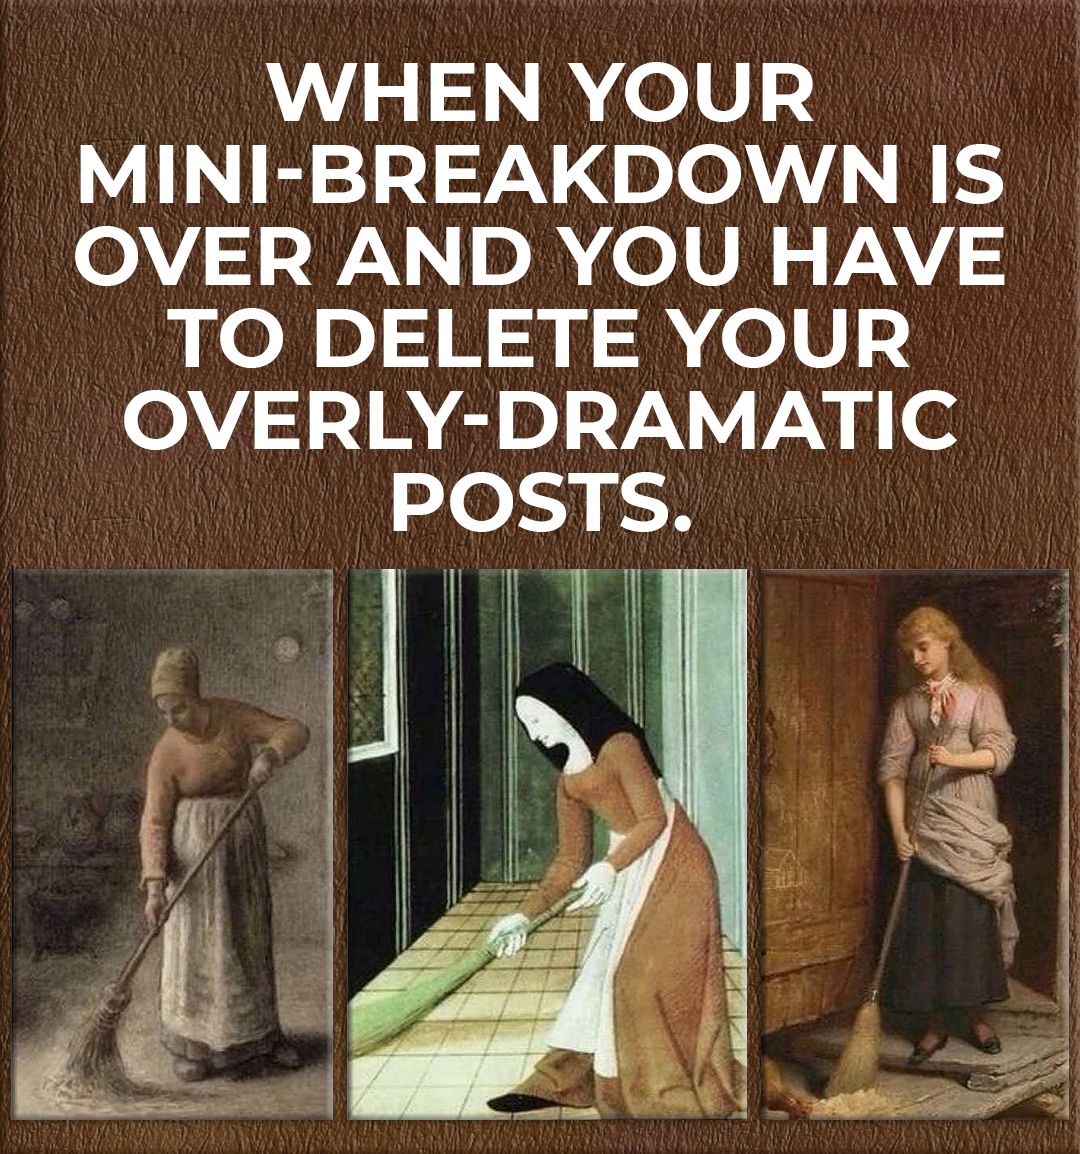 memes about internet life and culture -  human behavior - When Your MiniBreakdown Is Over And You Have To Delete Your OverlyDramatic Posts.